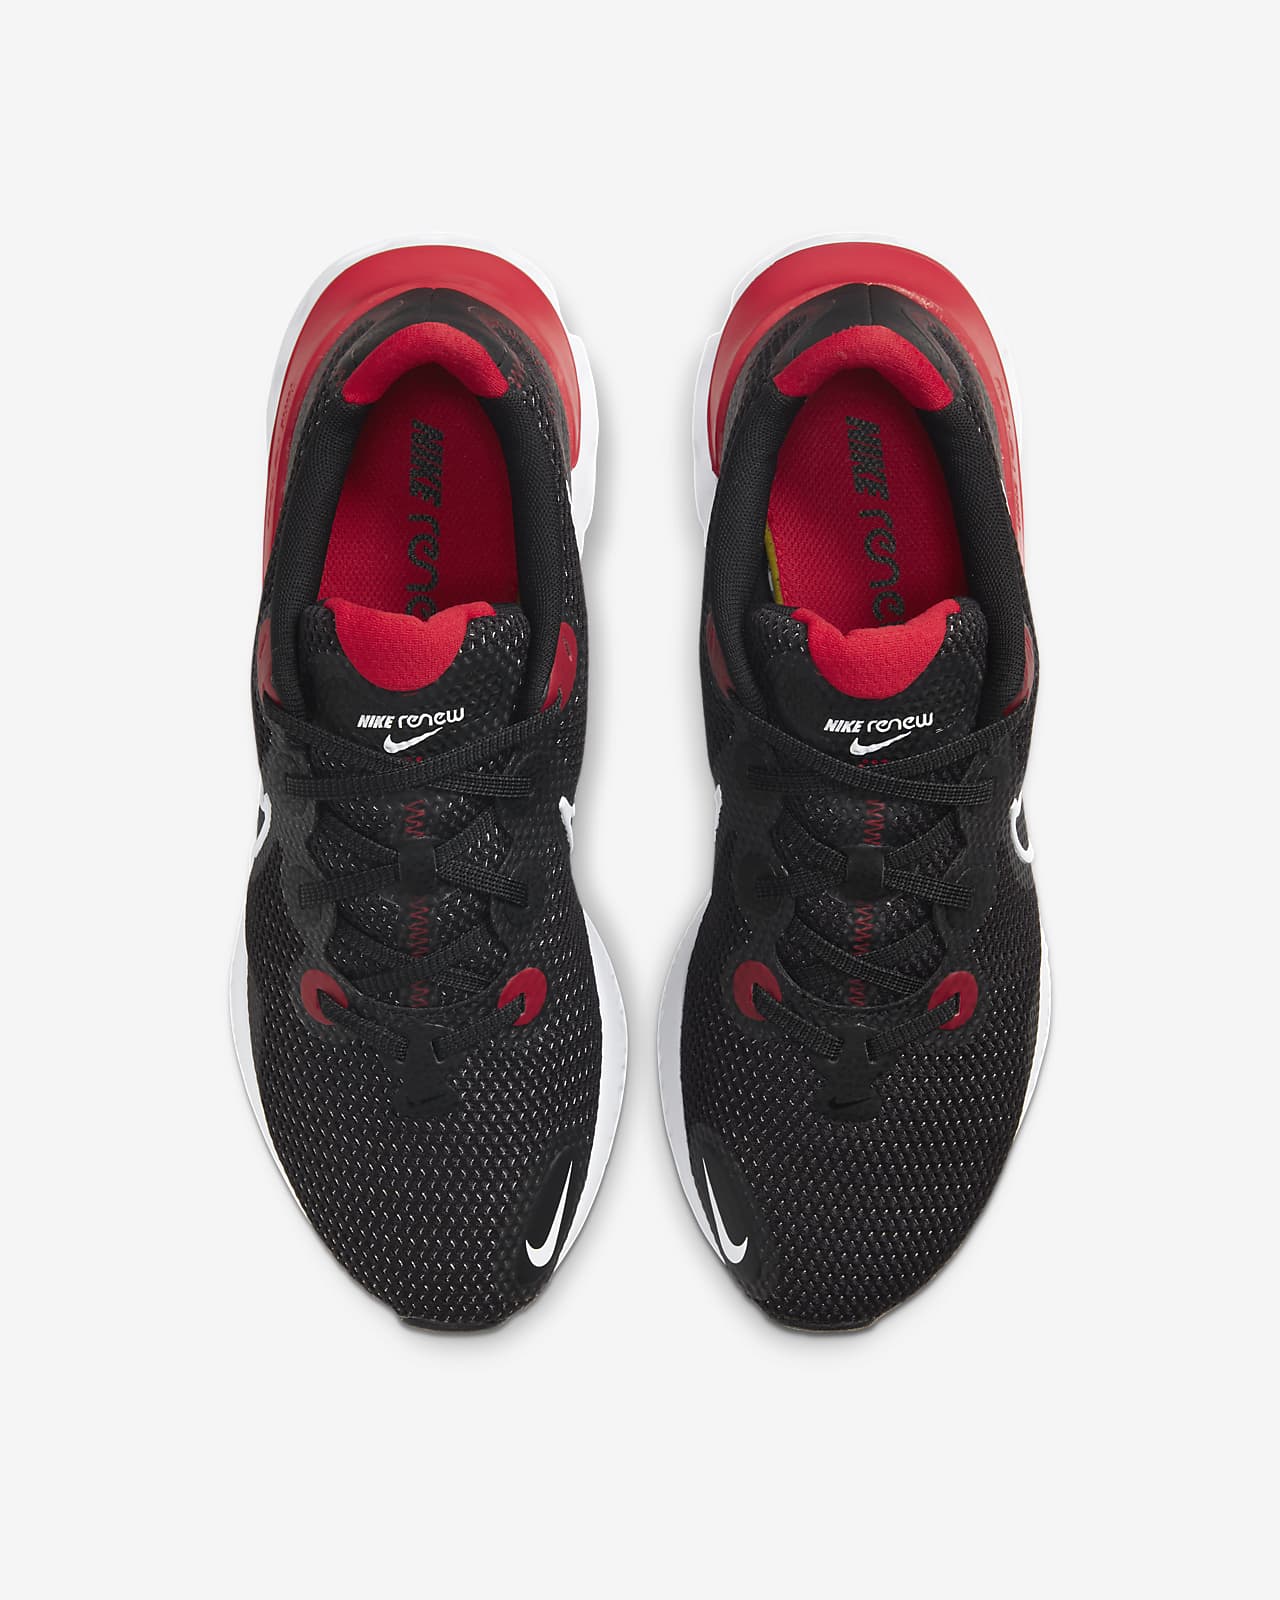 men's nike red and black running shoes